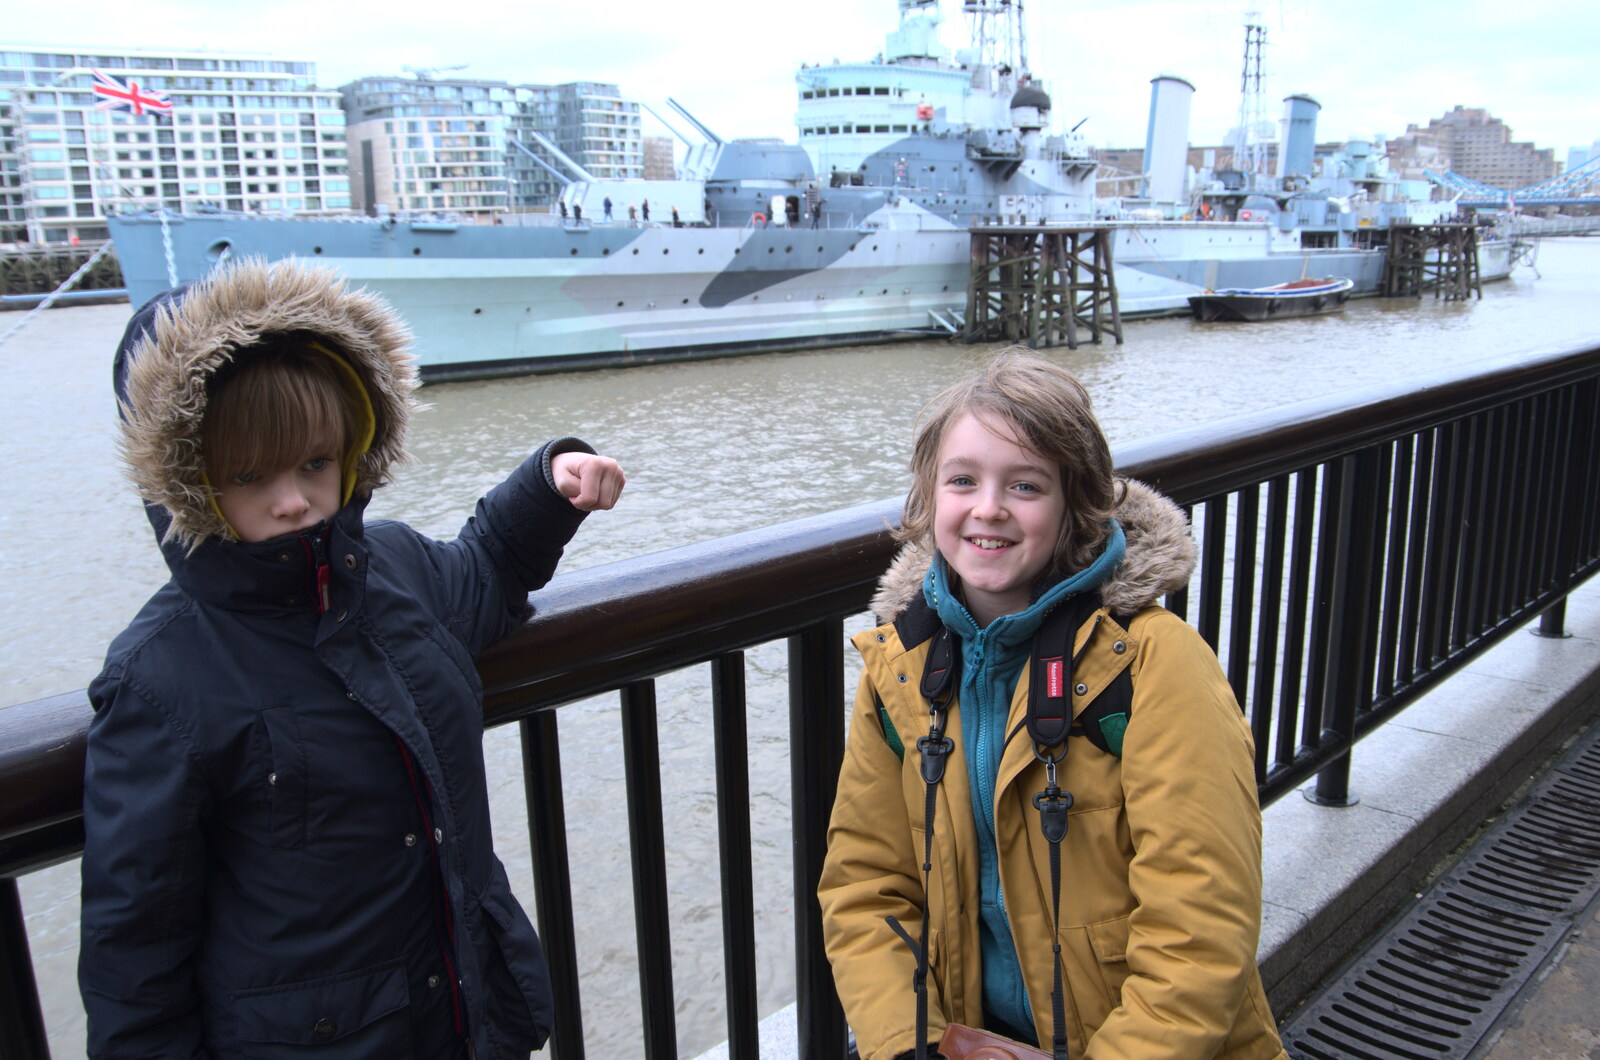 Harry and Fred from HMS Belfast and the South Bank, Southwark, London - 17th February 2020